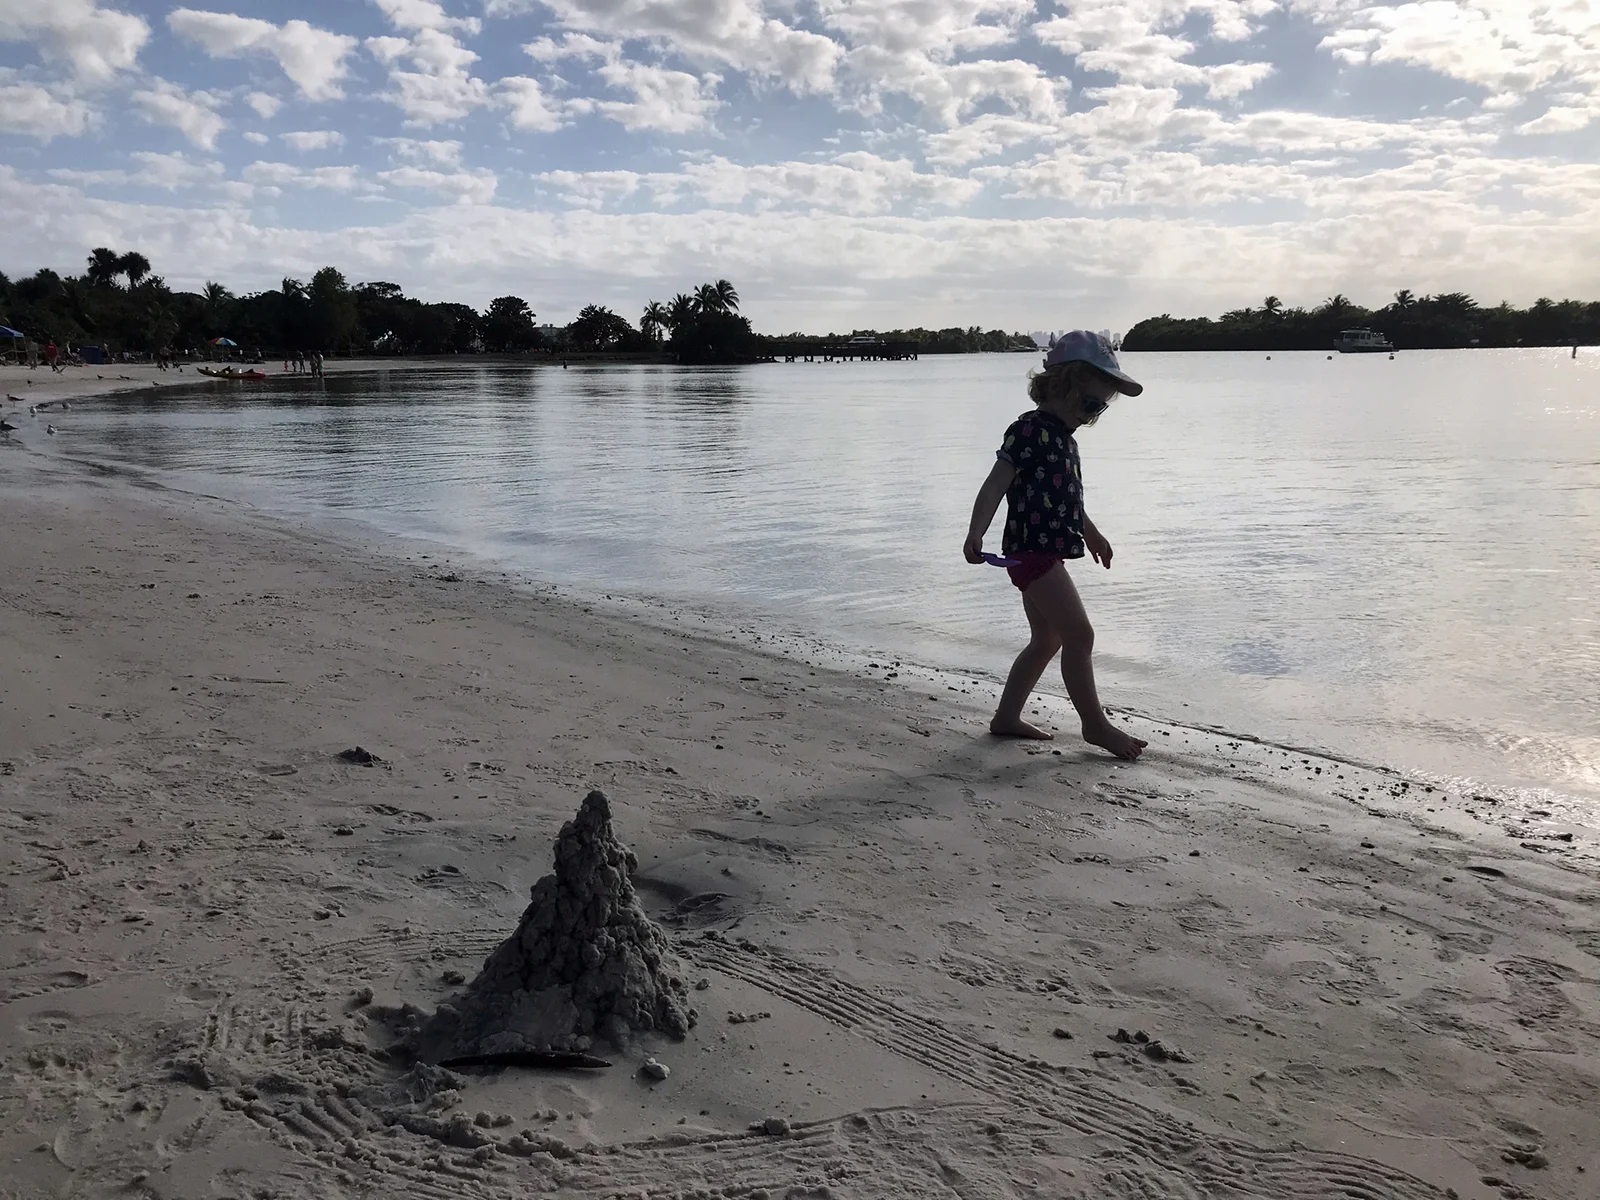  Oleta River State Park has the best beach for the smallest kids. (Photo: Bonnie Gross)